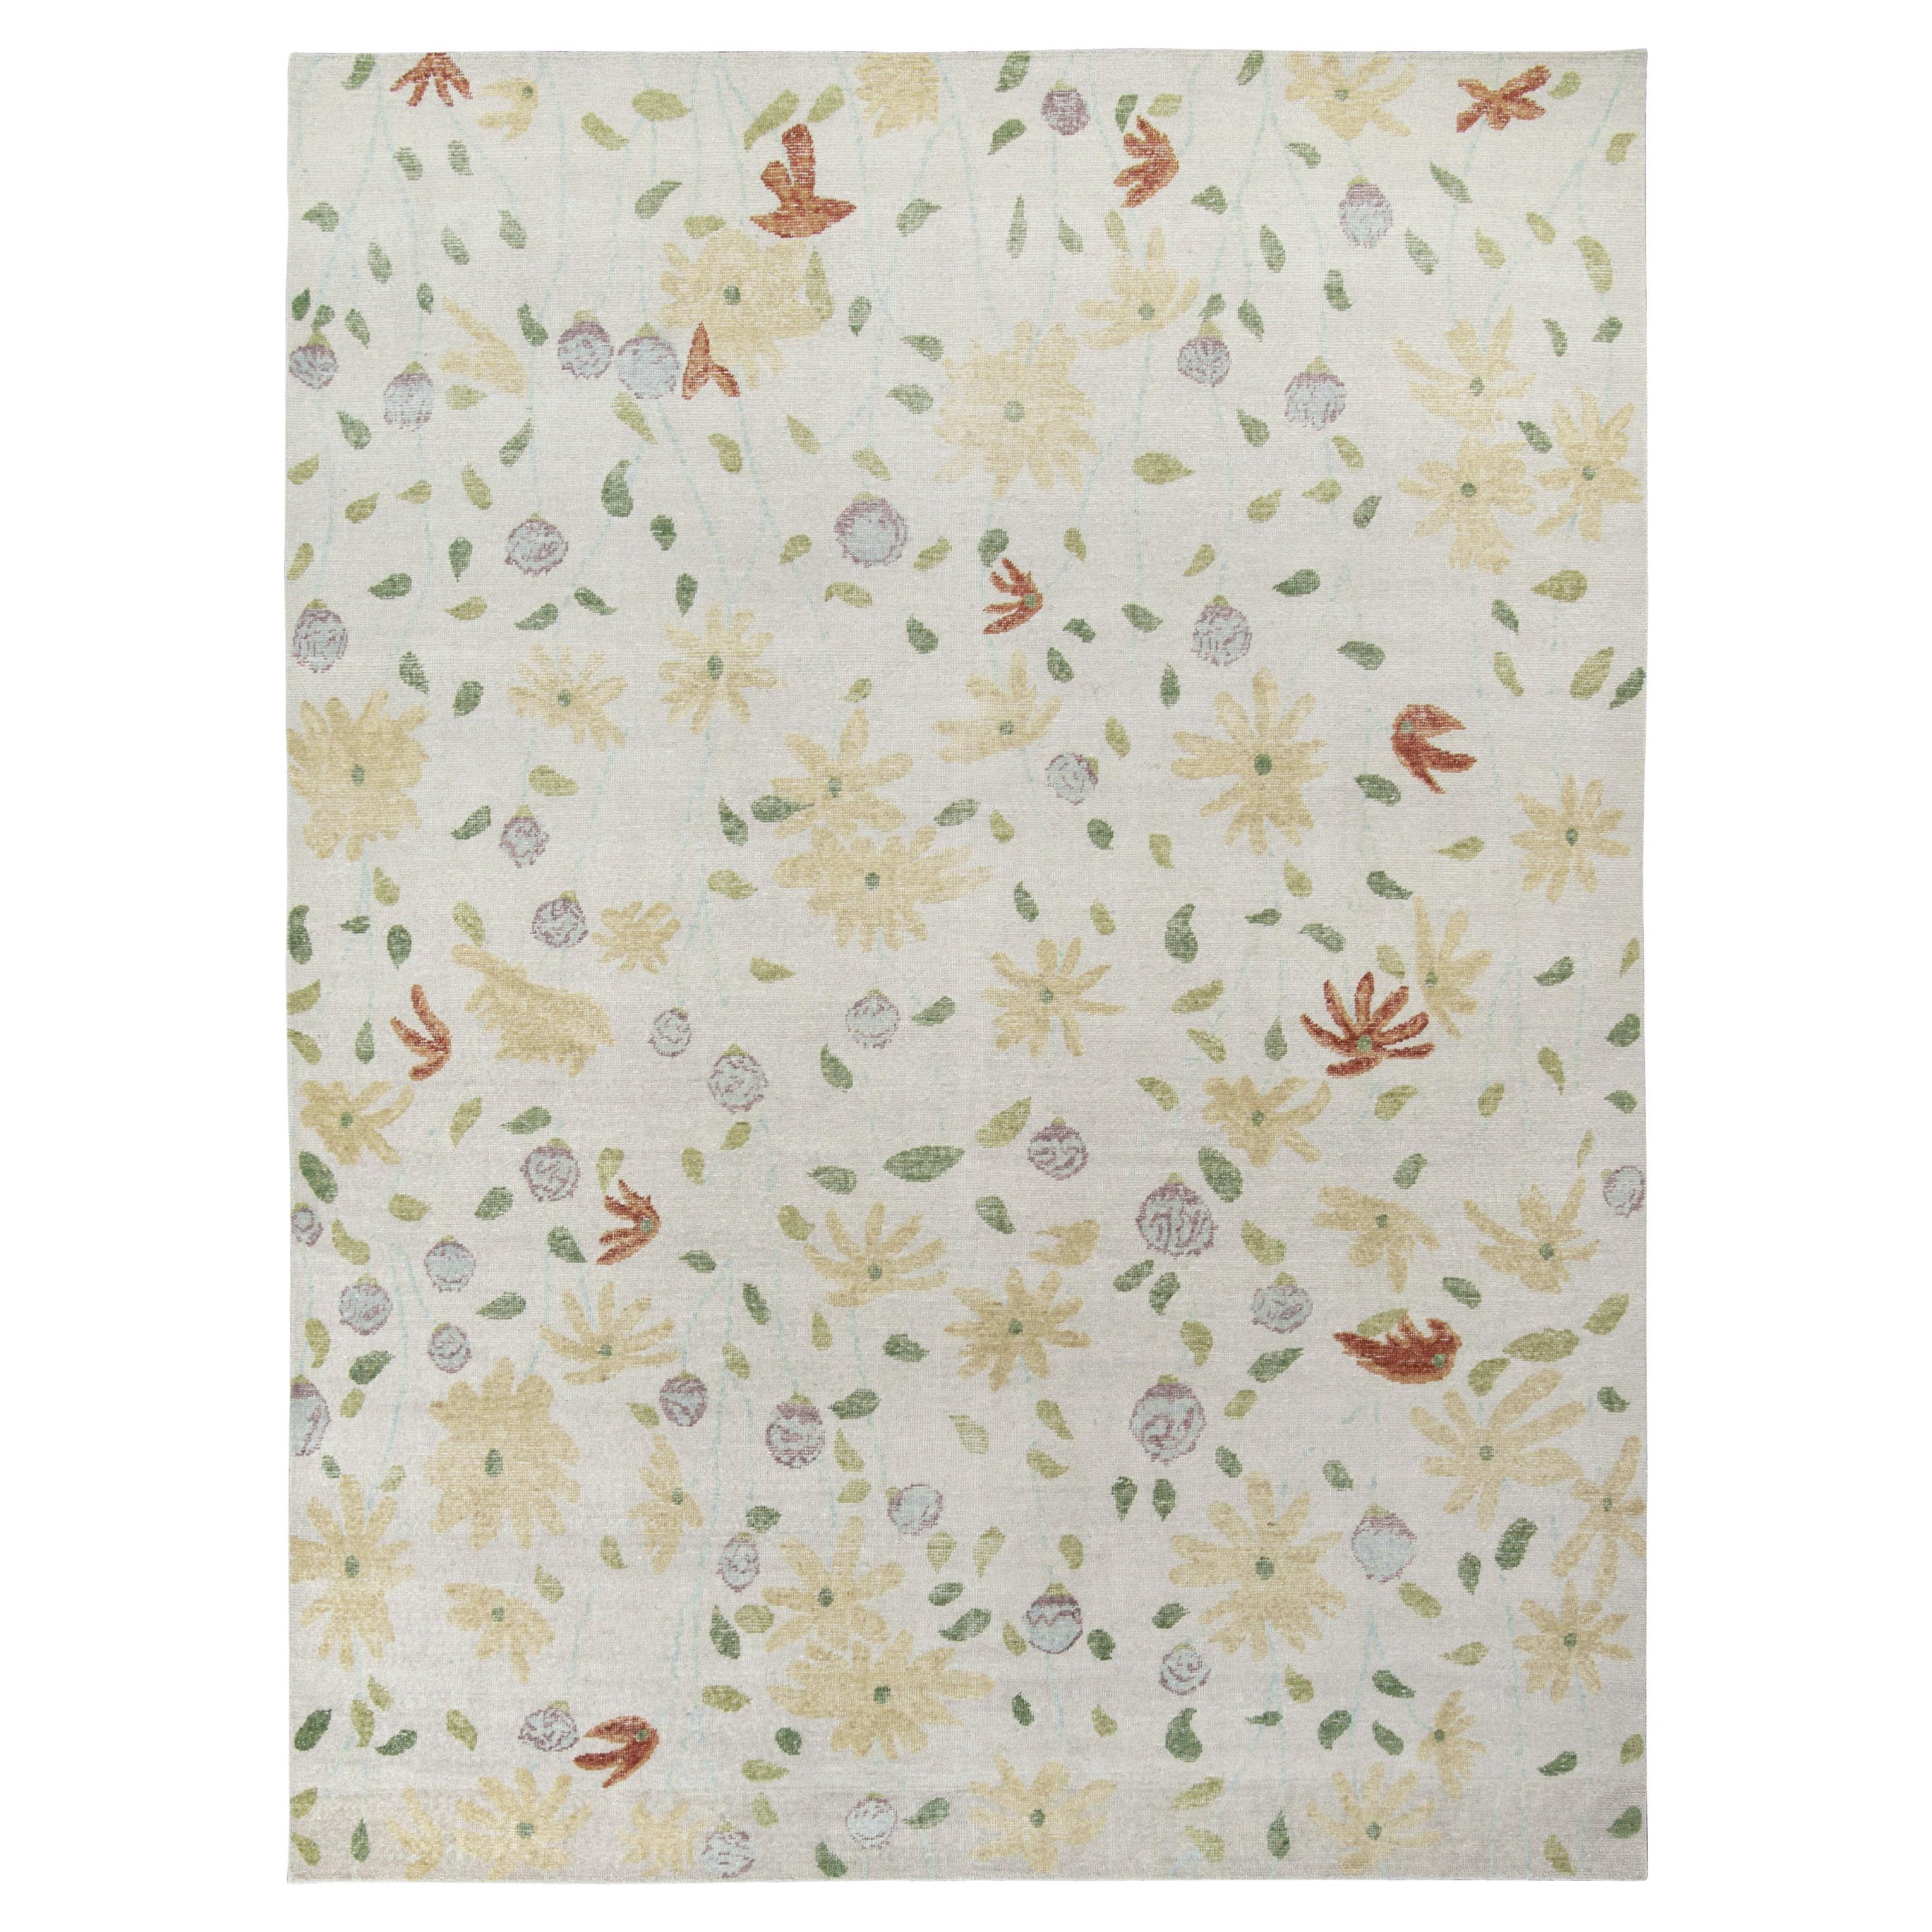 Rug & Kilim’s Distressed Contemporary Rug in White with Beige Floral Patterns